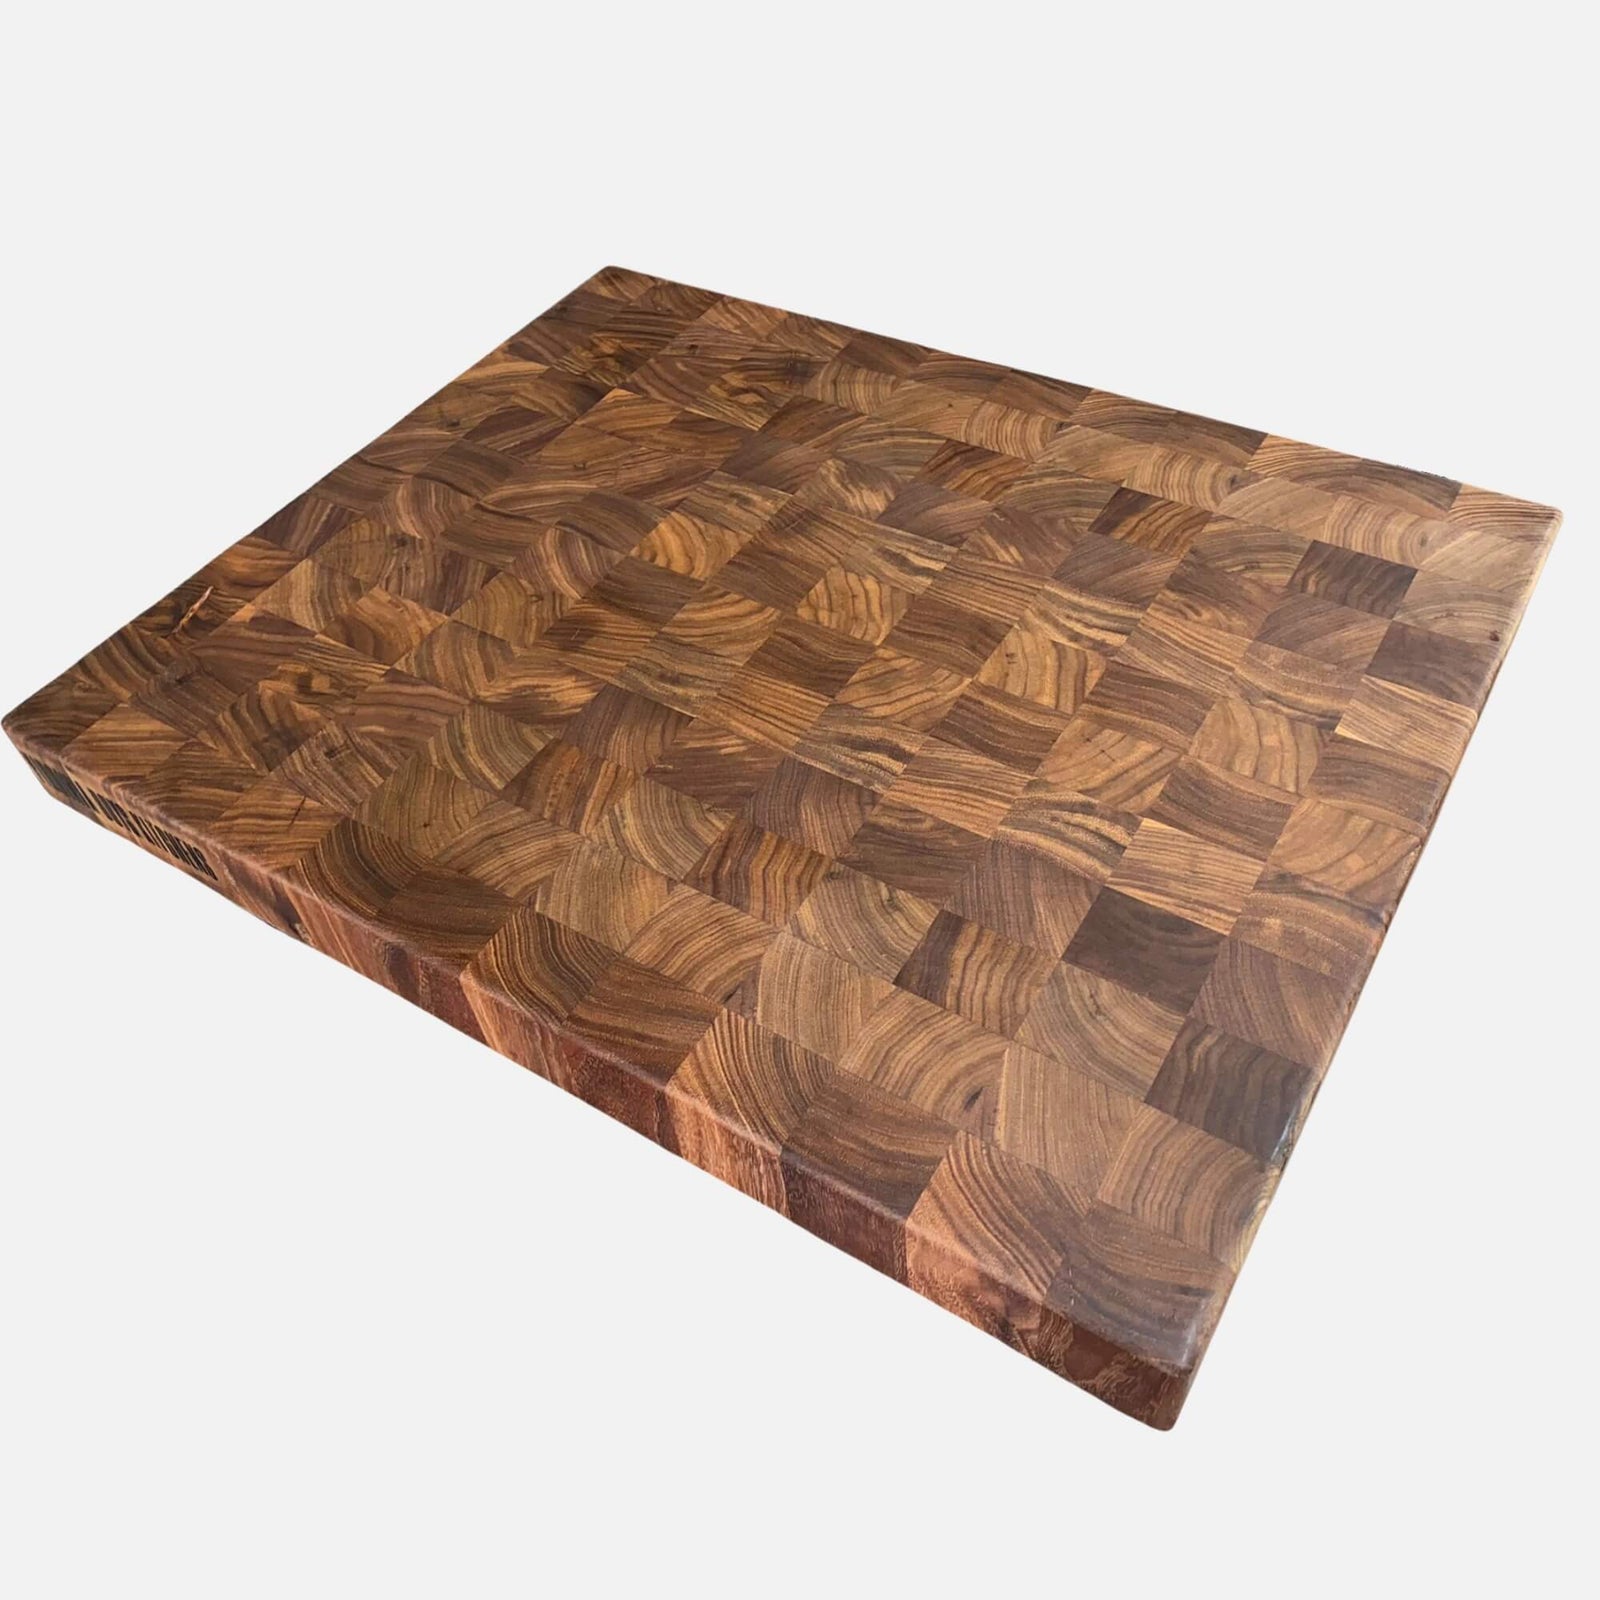 https://virginiaboyskitchens.com/cdn/shop/products/virginia-boys-kitchens-20x16-in-end-grain-large-walnut-cutting-board-with-feet-made-in-usa-20-x-16-extra-large-end-grain-walnut-wood-cutting-board-cutting-board-made-in-usa-from-susta_1600x.jpg?v=1702758783